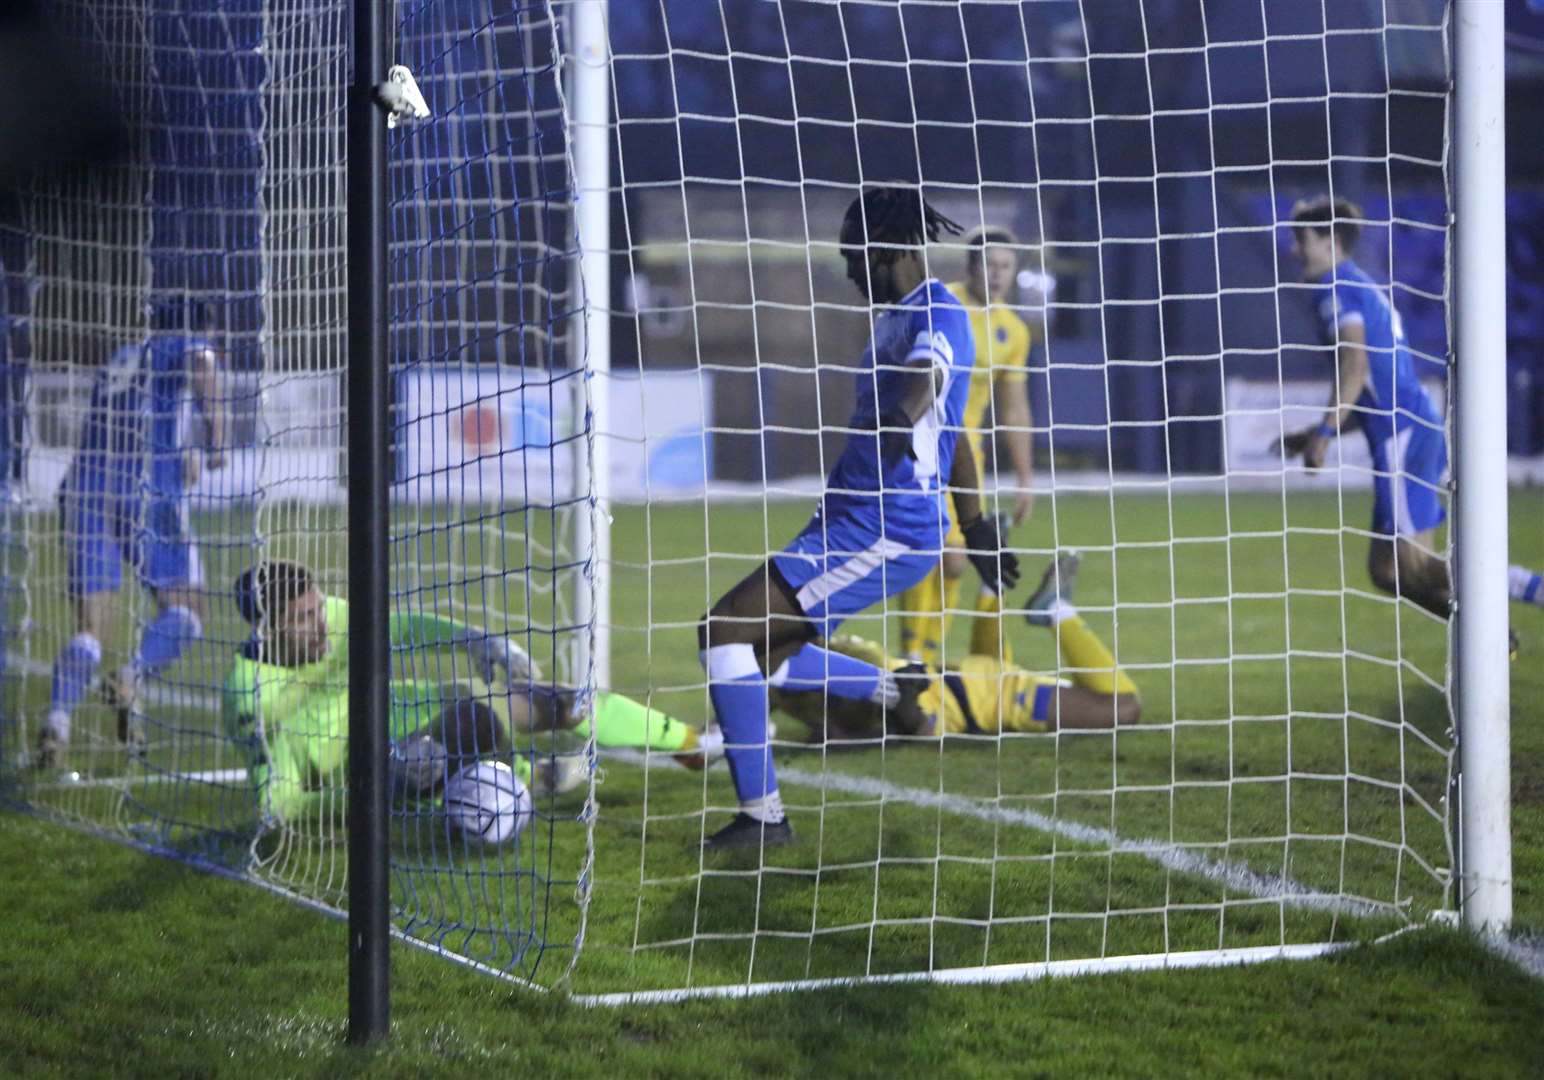 Tommy Wood (No 9) scores Tonbridge's late equalizer in the FA Trophy Photo: Dave Couldridge